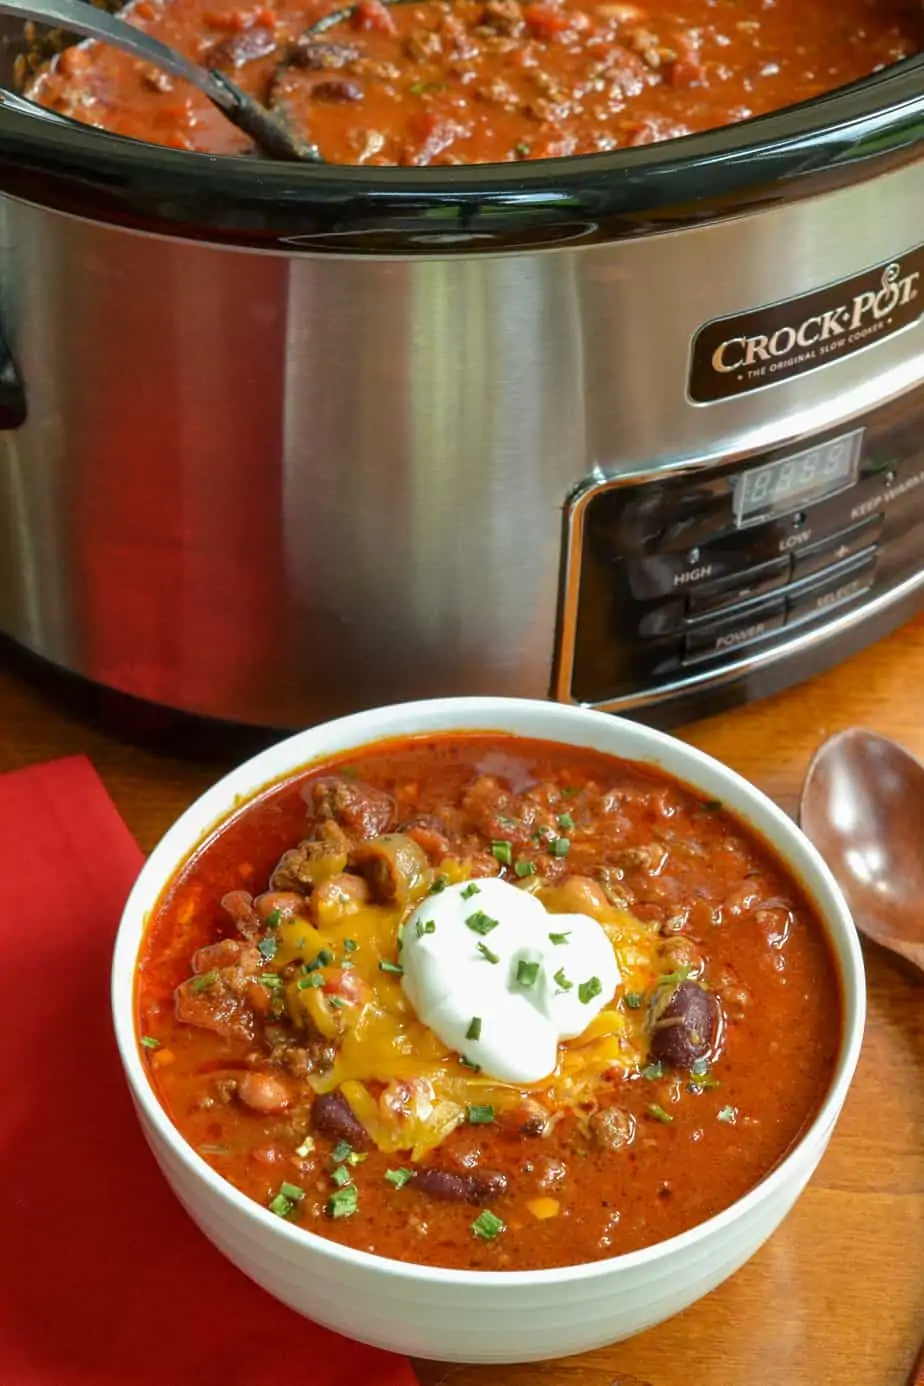 A crock and a bowl full of chili